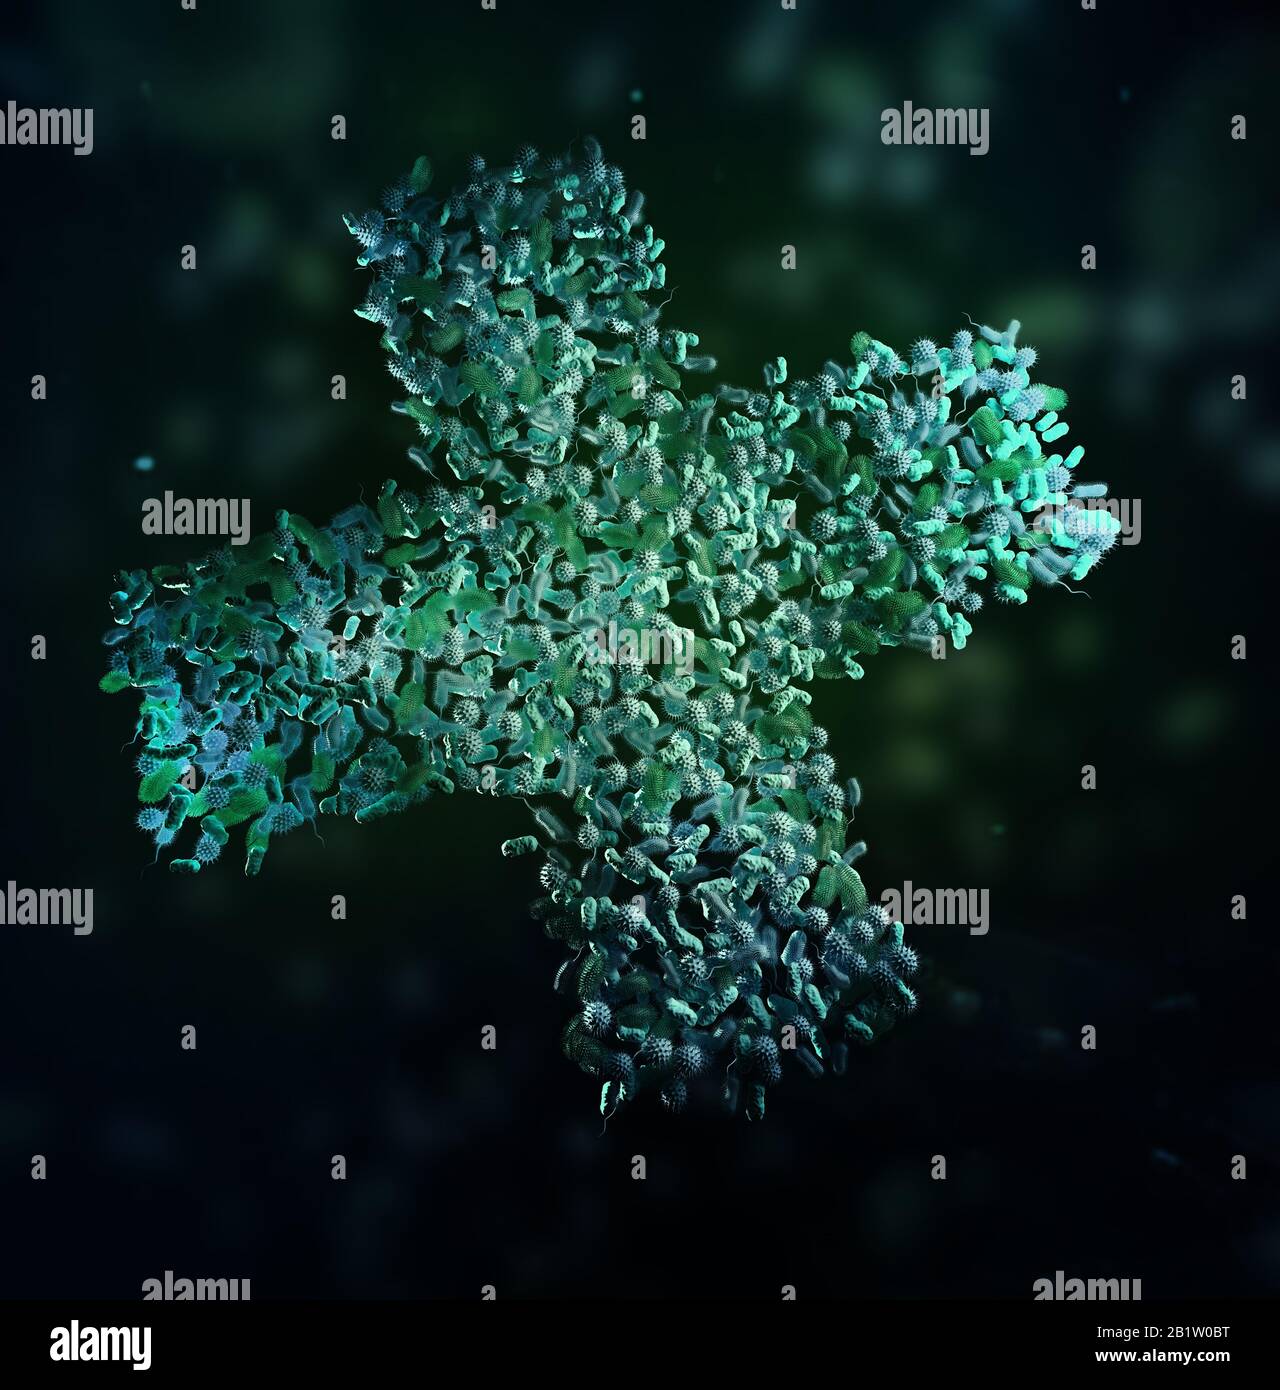 Bacteria forming a cross - microbiome and probiotics concept 3D illustration. Stock Photo